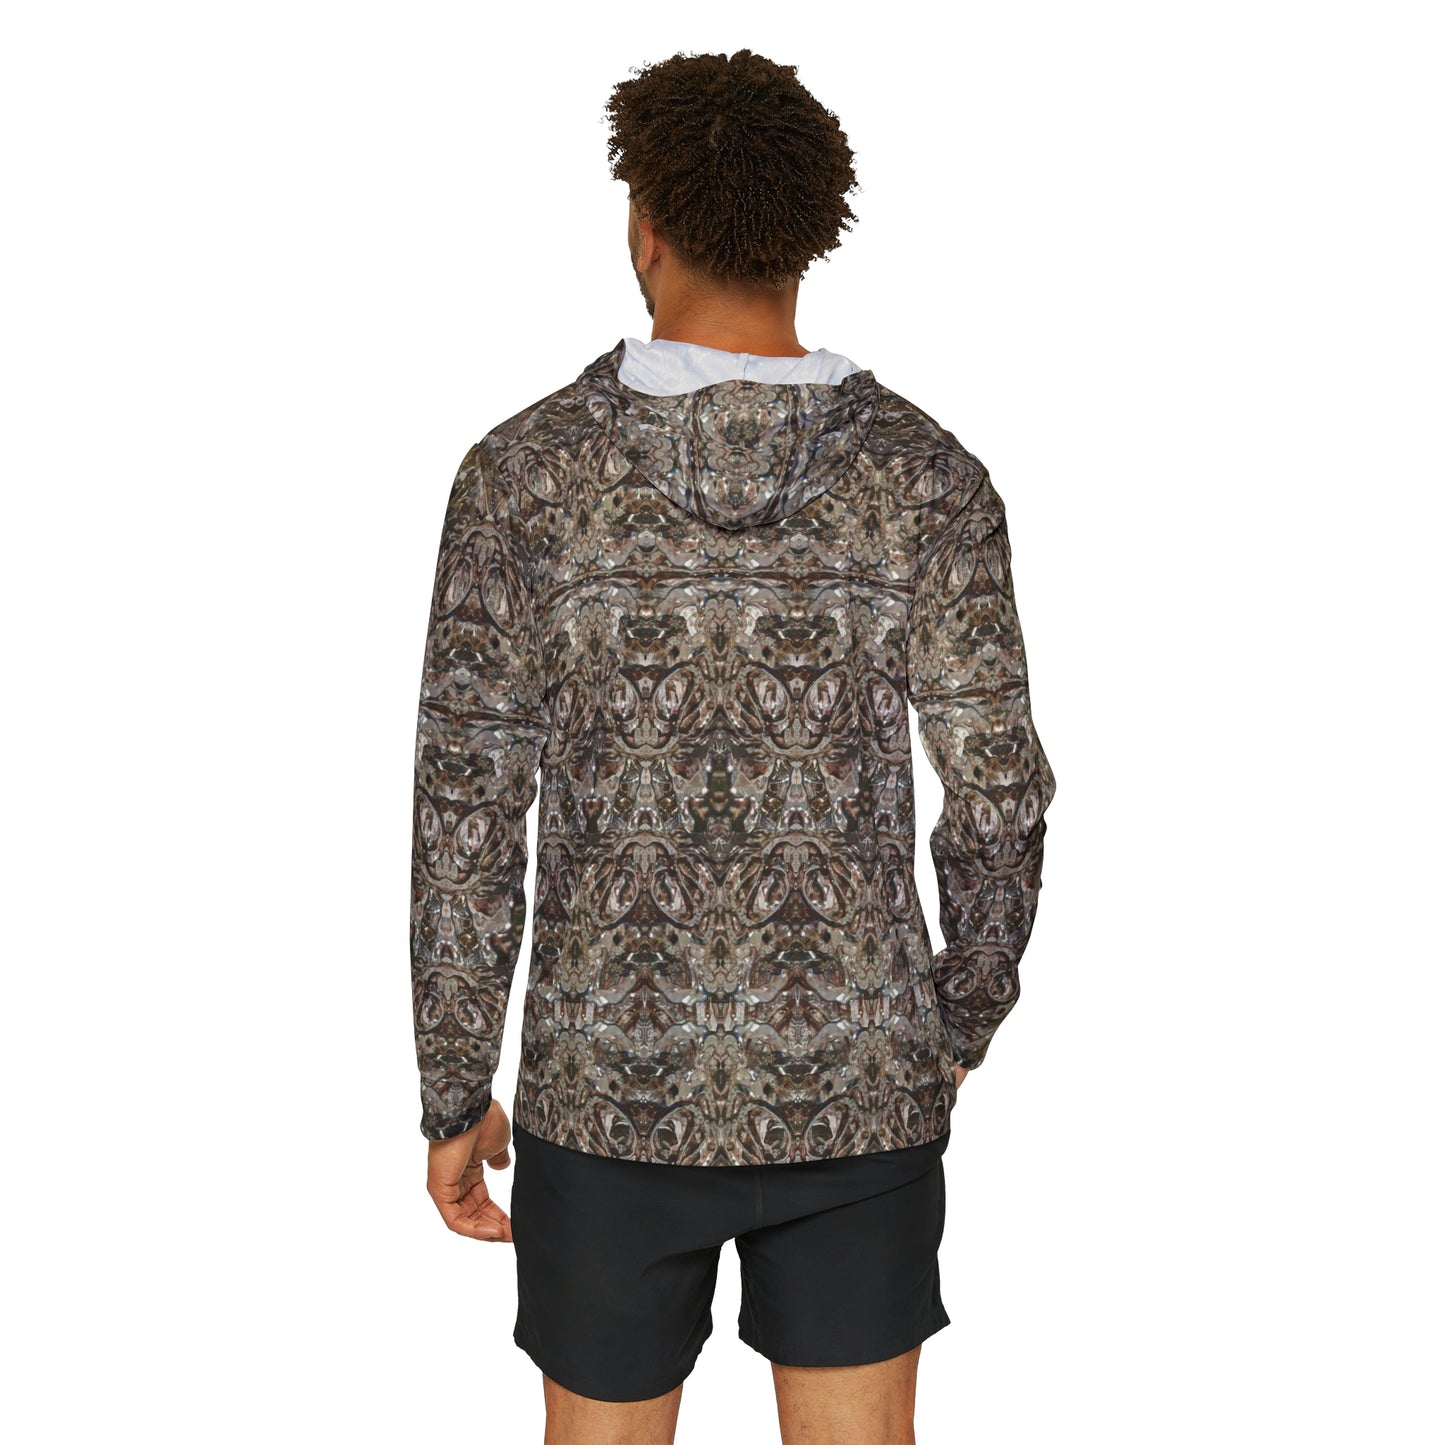 Athletic Activewear Hoodie (His/They)(Samhain Dream Thaw 9 of 15 Novem ex Quindecim) RJSTH@w2023 RJS